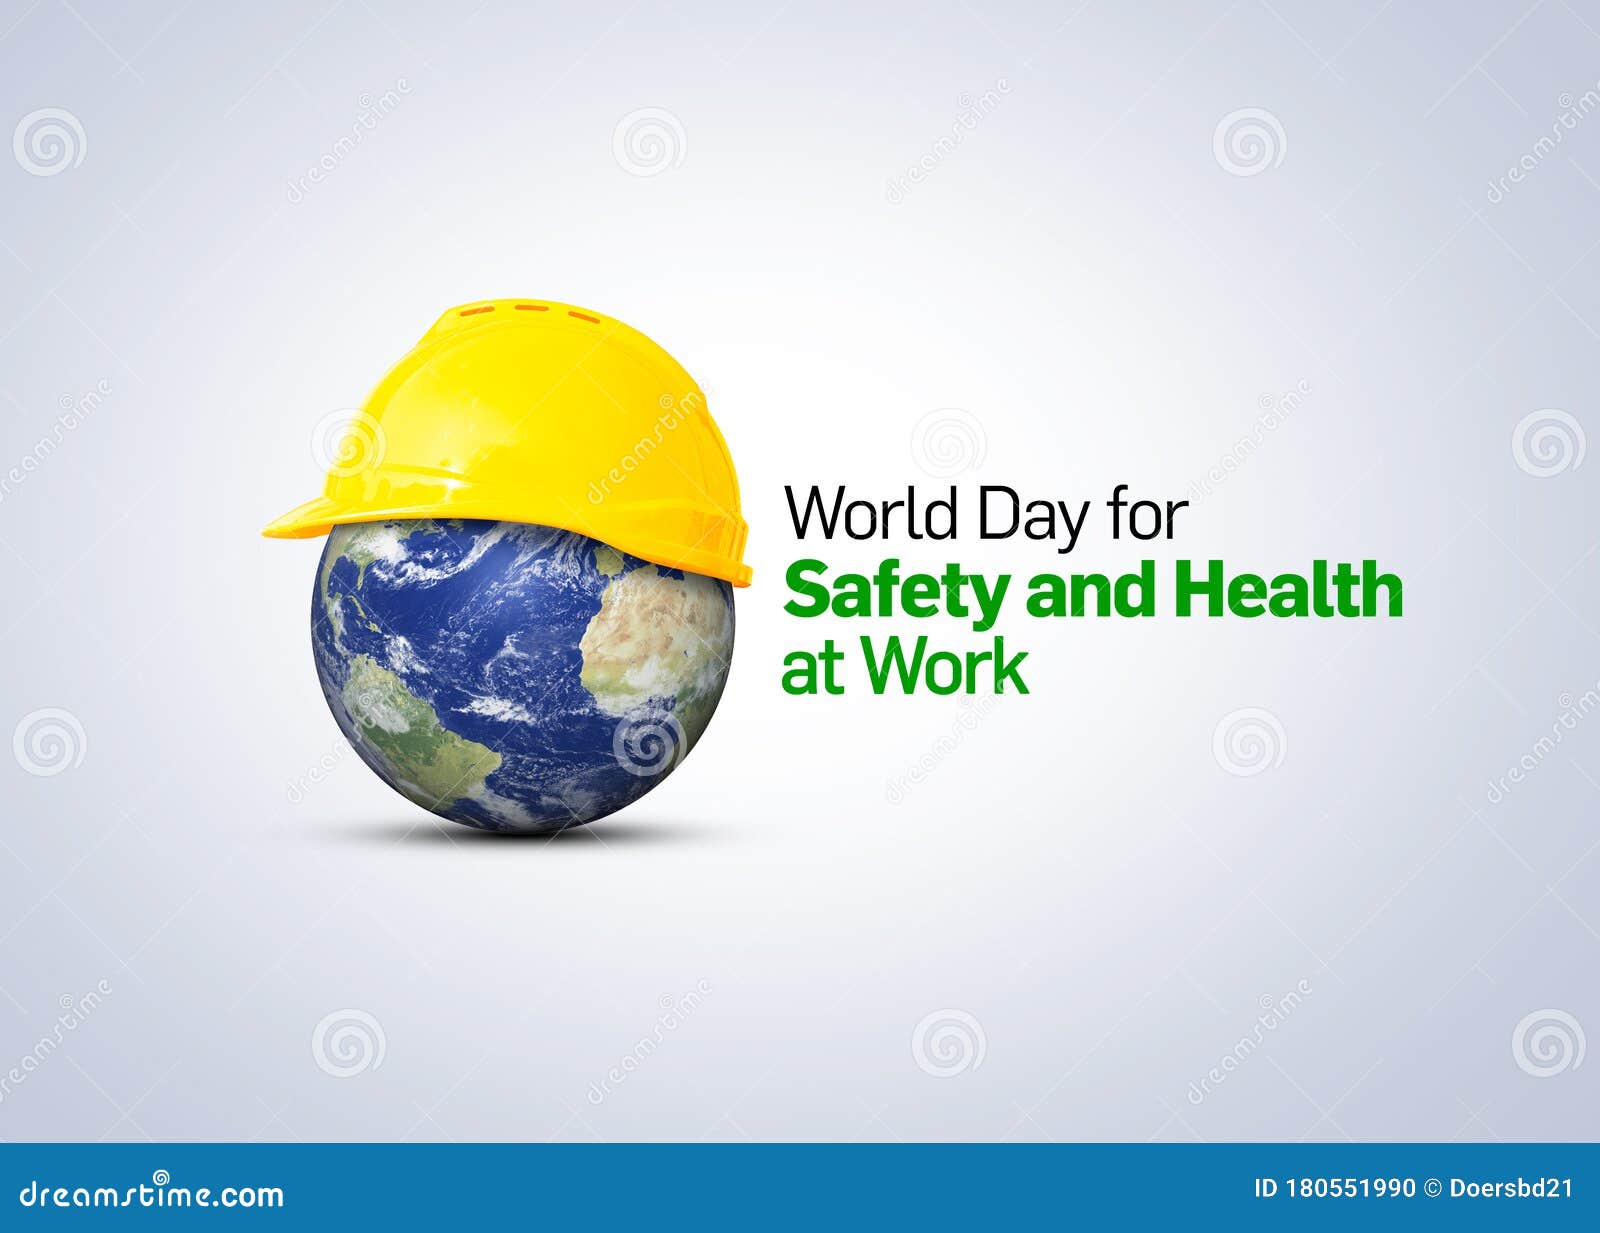 World Day for Safety and Health at Work Concept. Stock Photo Image of